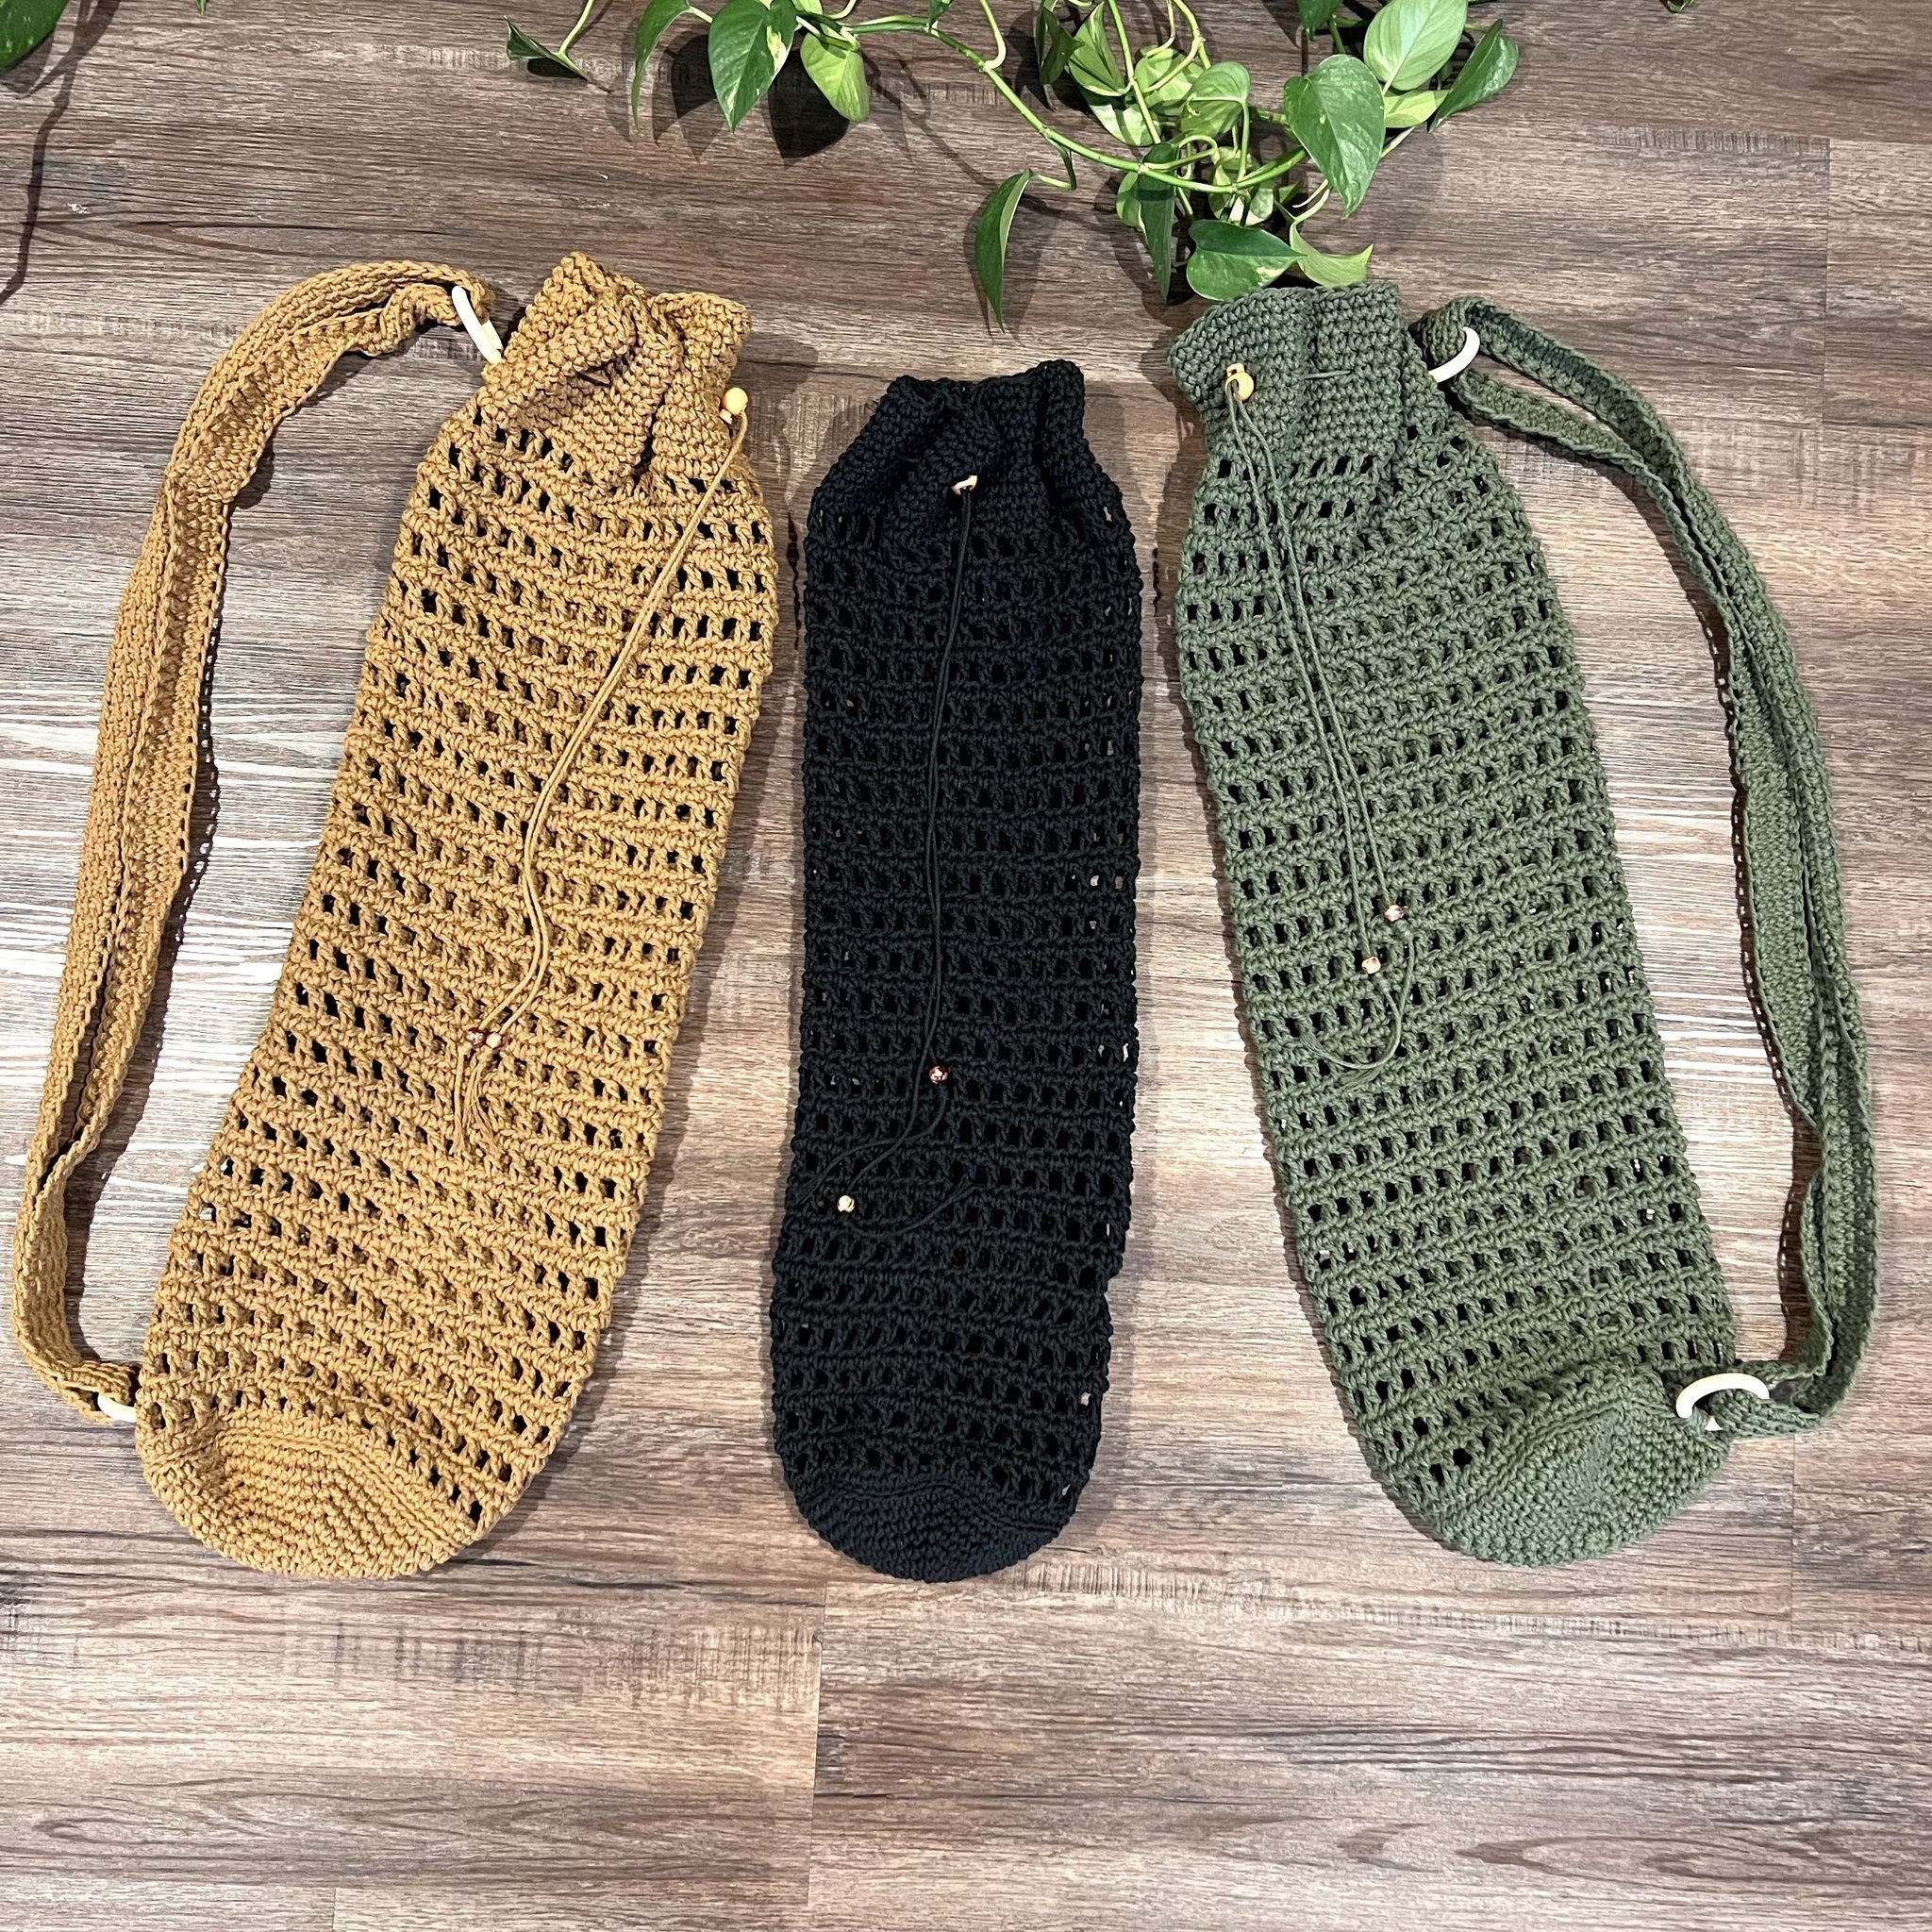 Check out these Hand-Crochet Mat Bags in Prop Shop✨

These beautiful, one of a kind hand-crochet yoga mat bags are made from macram&eacute; cord so they're sturdy and won't stretch. Made locally in Calgary. 🧘

Online + in store at @ciy_houseofyoga. 